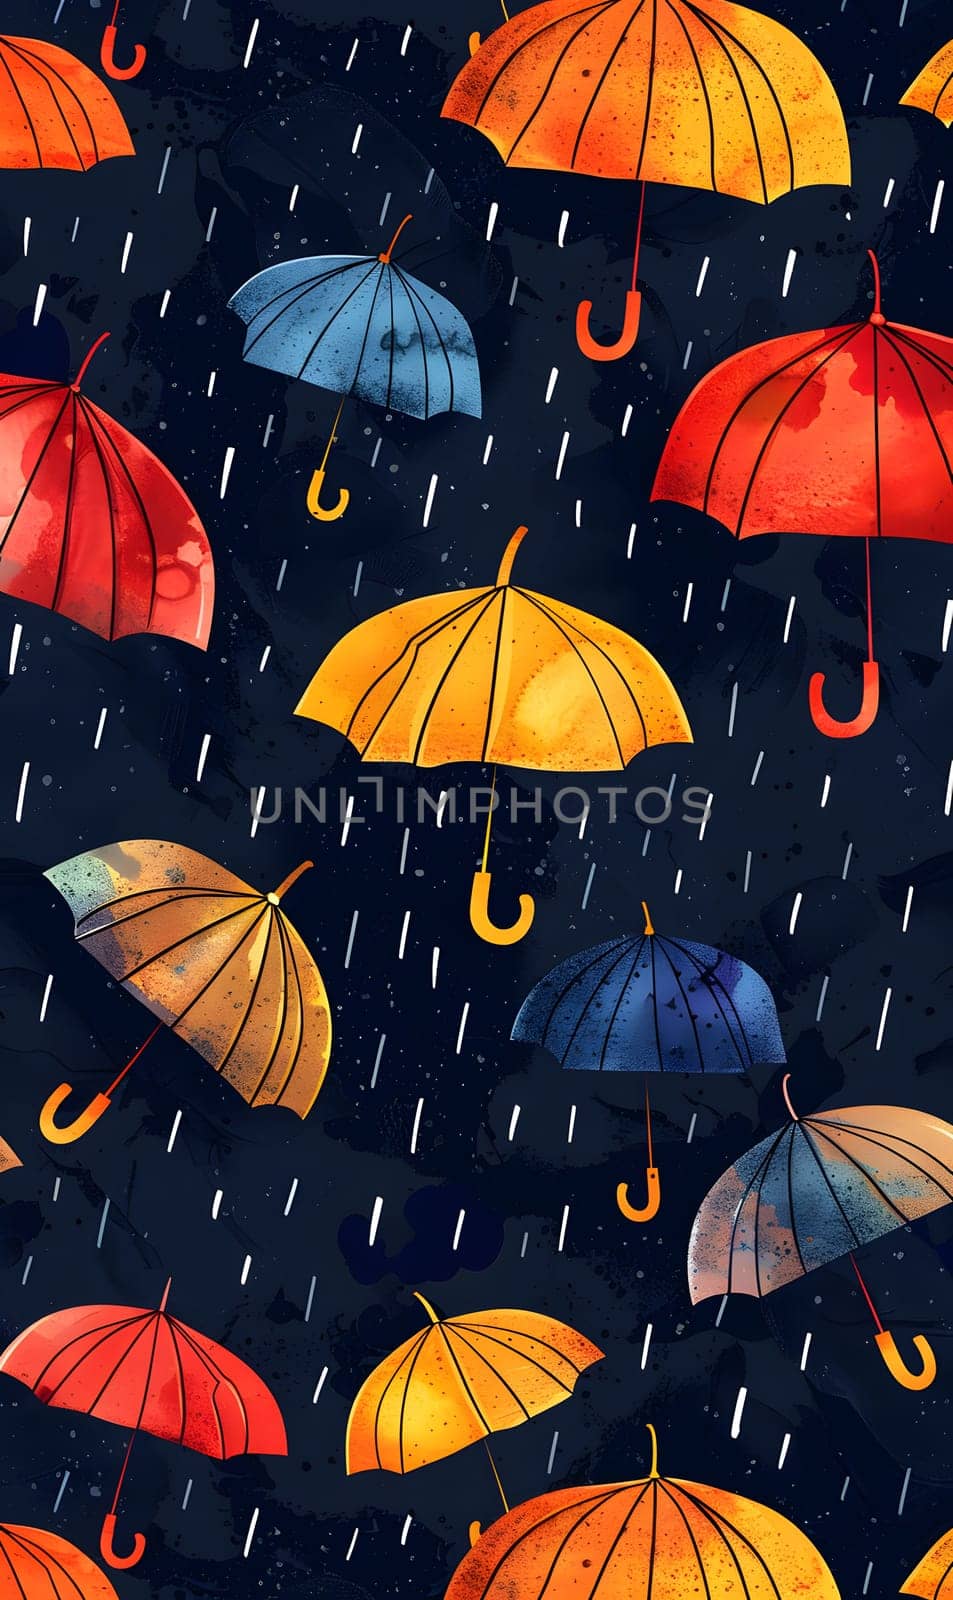 A captivating pattern of black and orange umbrellas in the rain, illuminated by electric blue lighting. The scene forms a seamless rectangle of colorful organism against the dark sky